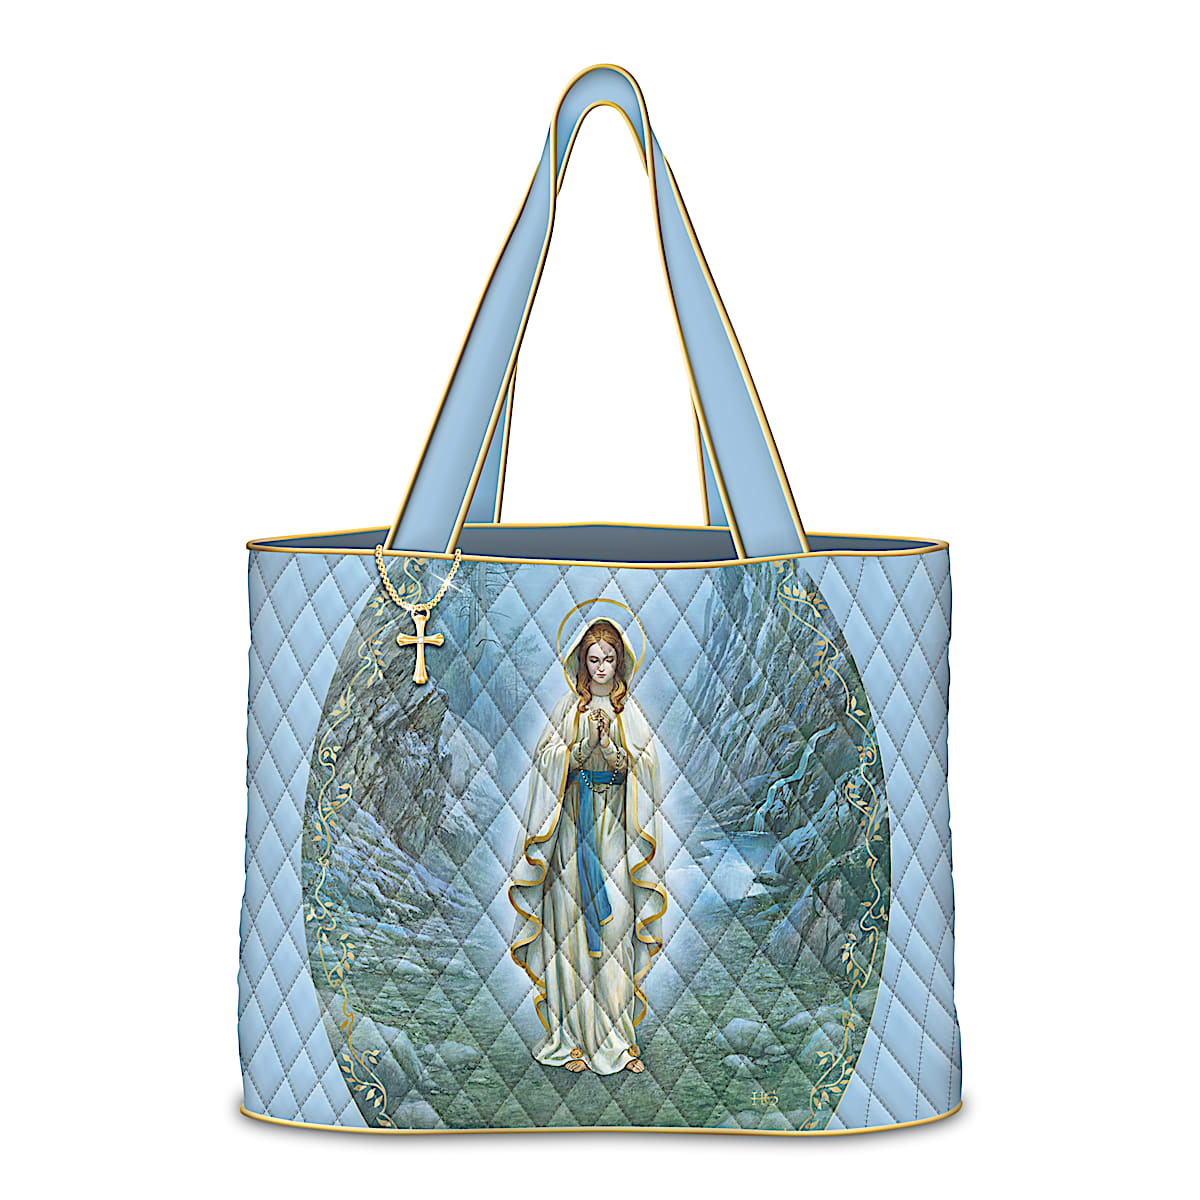 Our Lady of Lourdes Diamond Quilted Cotton-Polyester Twill Soft Blue Tote Bag Featuring Religious Art by Artist Hector Garrido with A Gold-Tone Molded